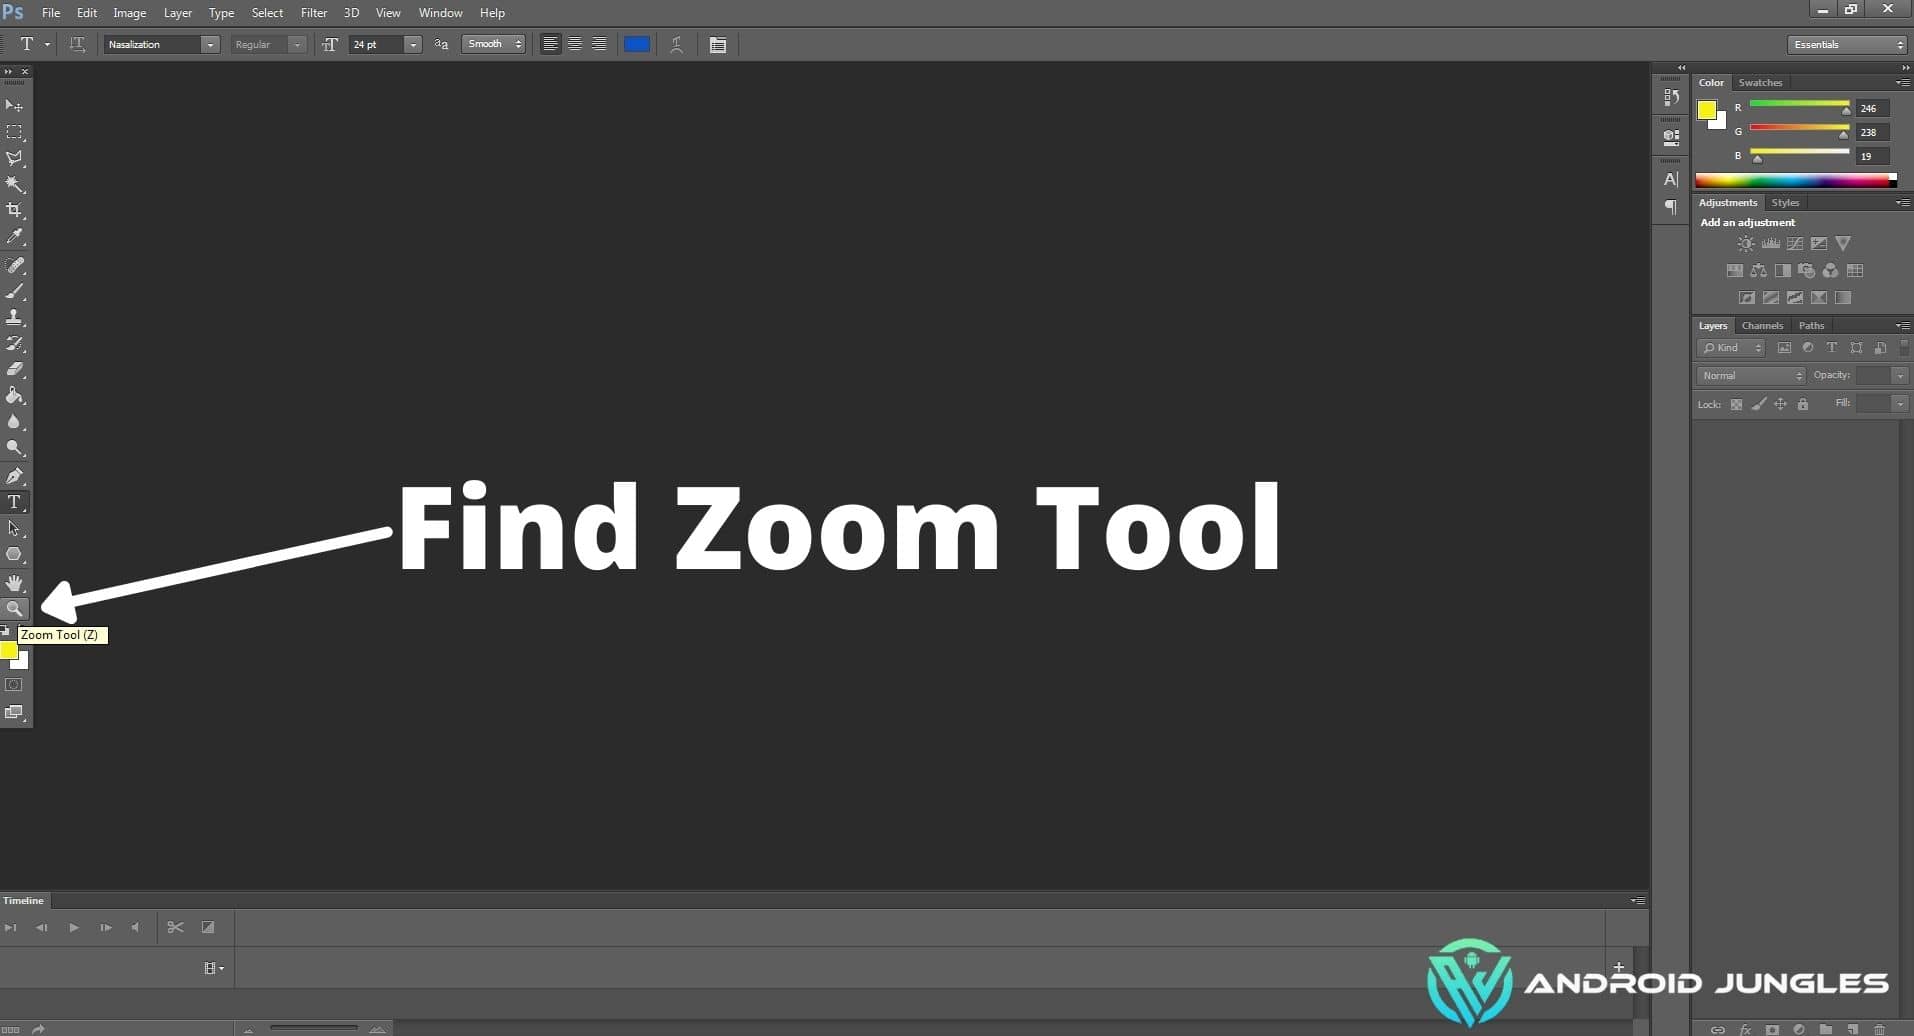 Find Zoom Tool